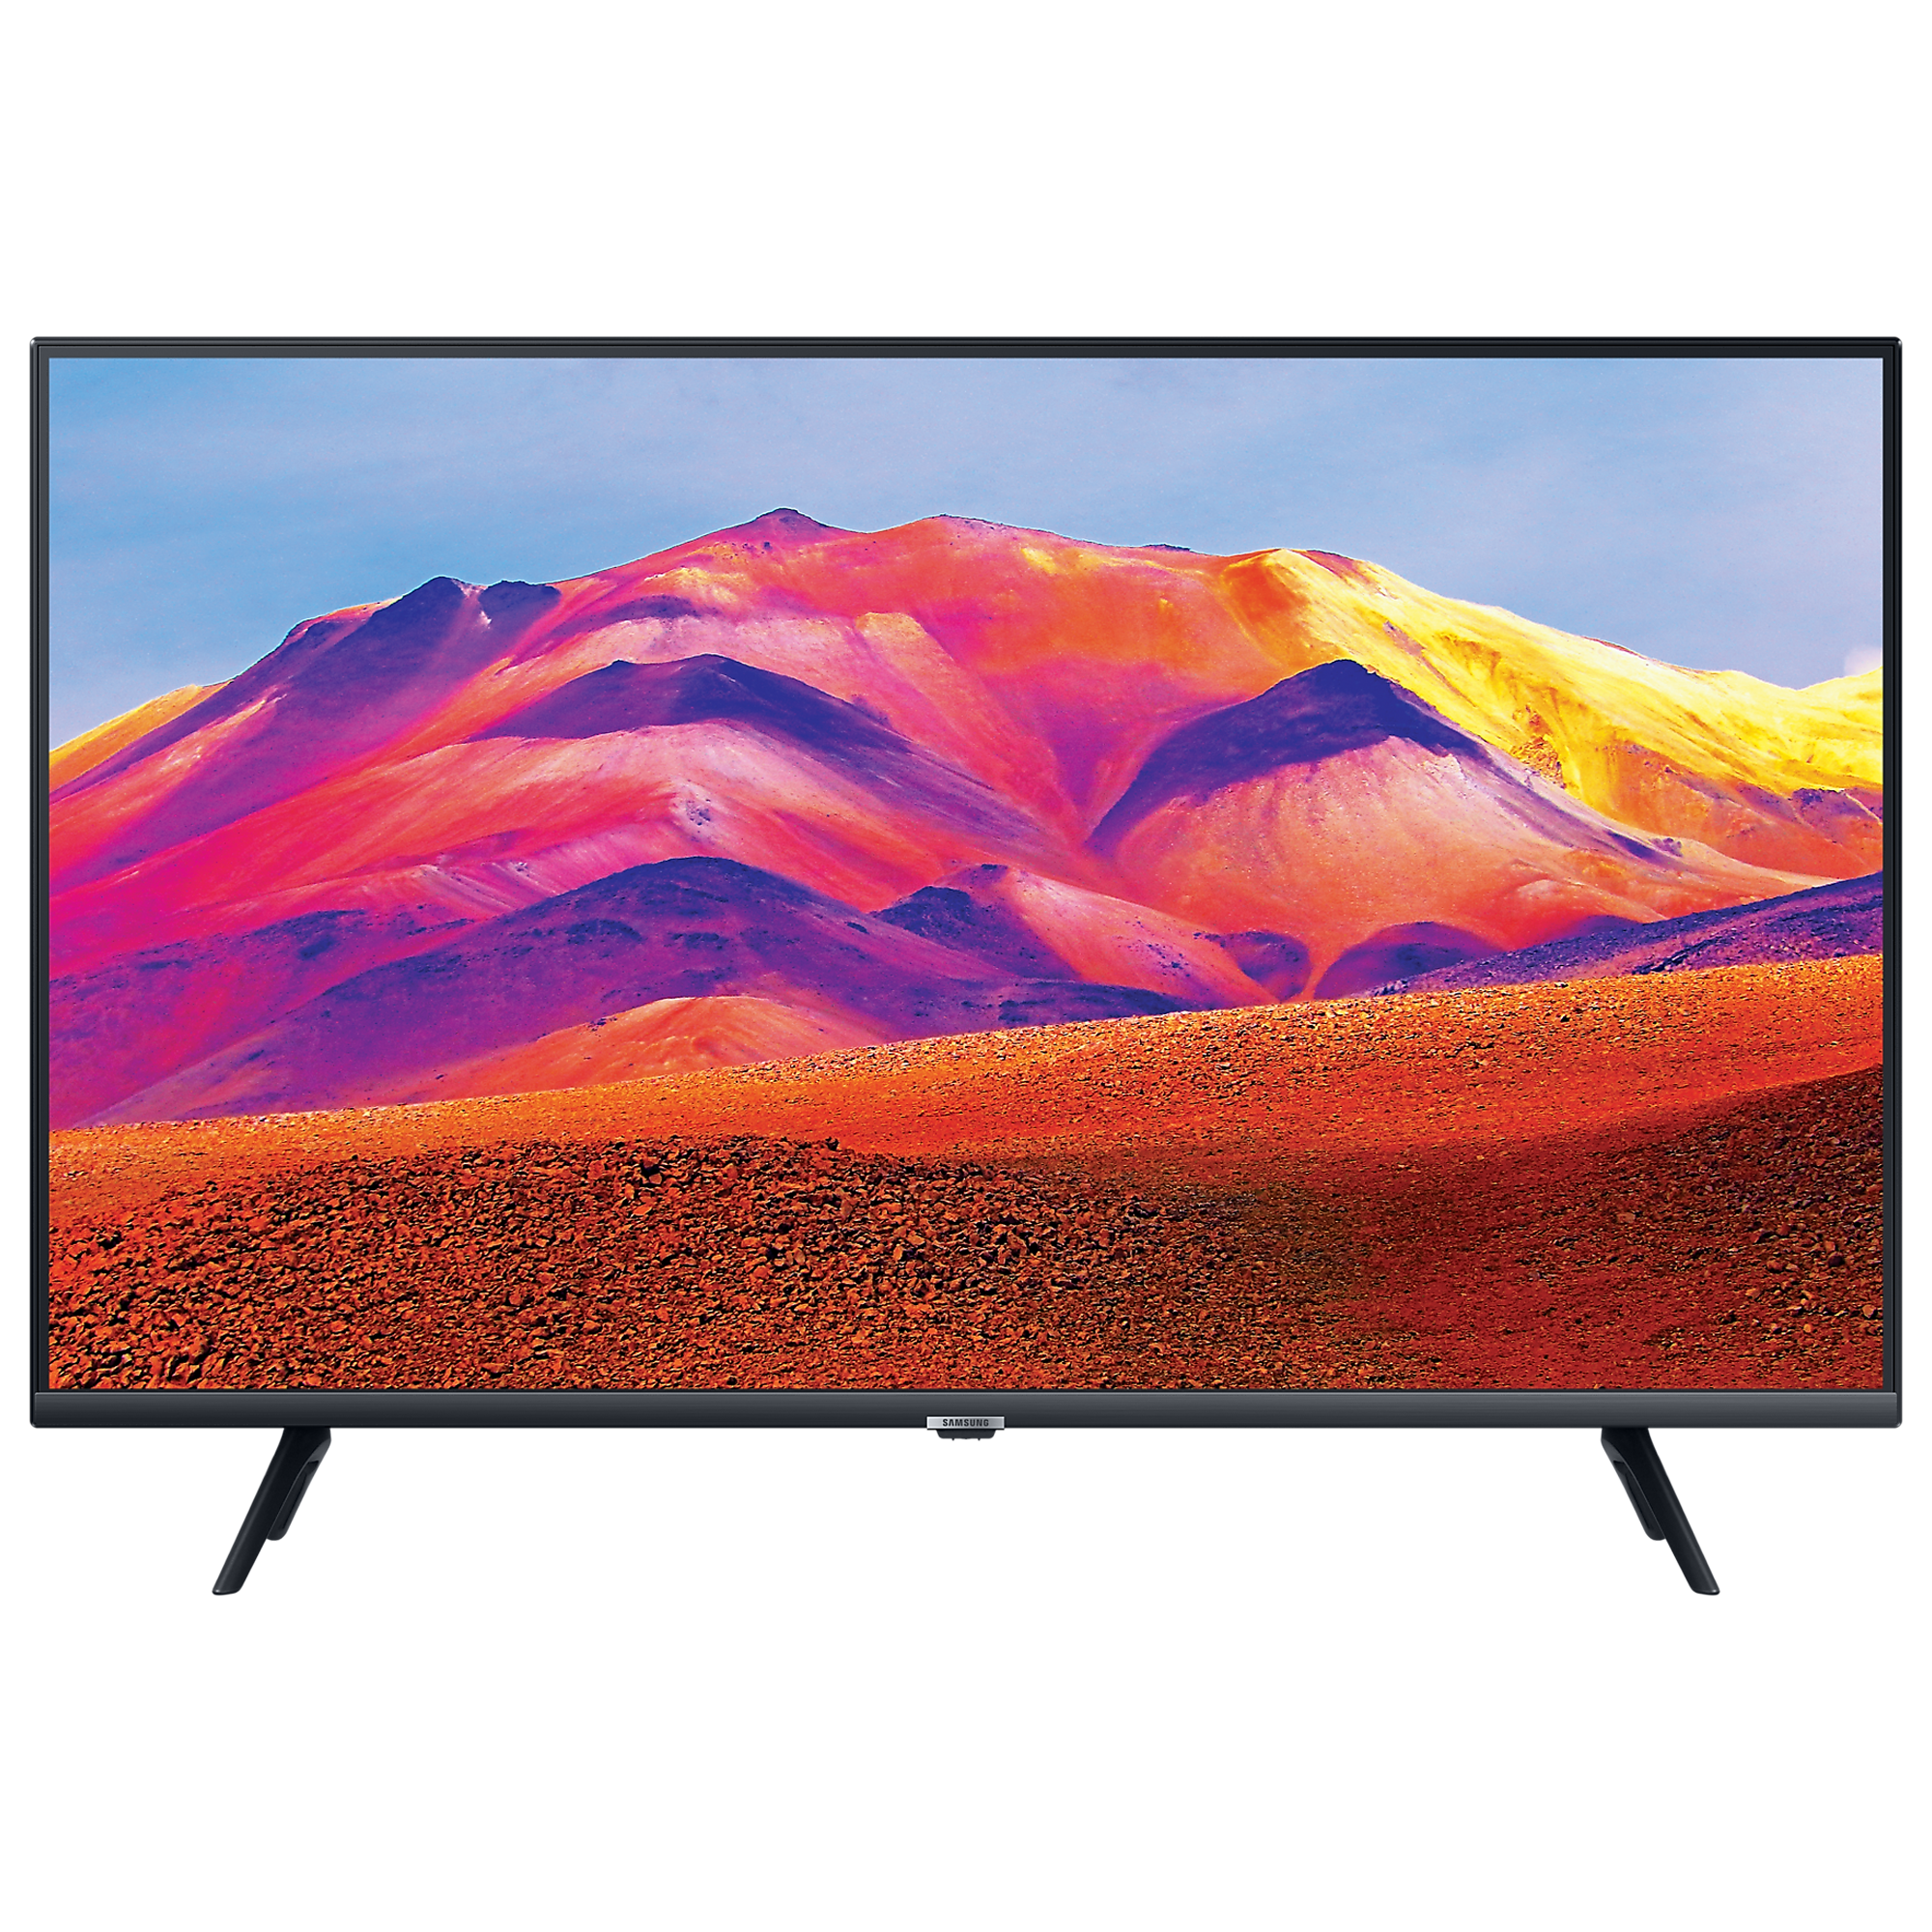 SAMSUNG Series 5 108 cm (43 inch) Full HD LED Tizen TV with Hyper Real Picture Processor (2022 model)